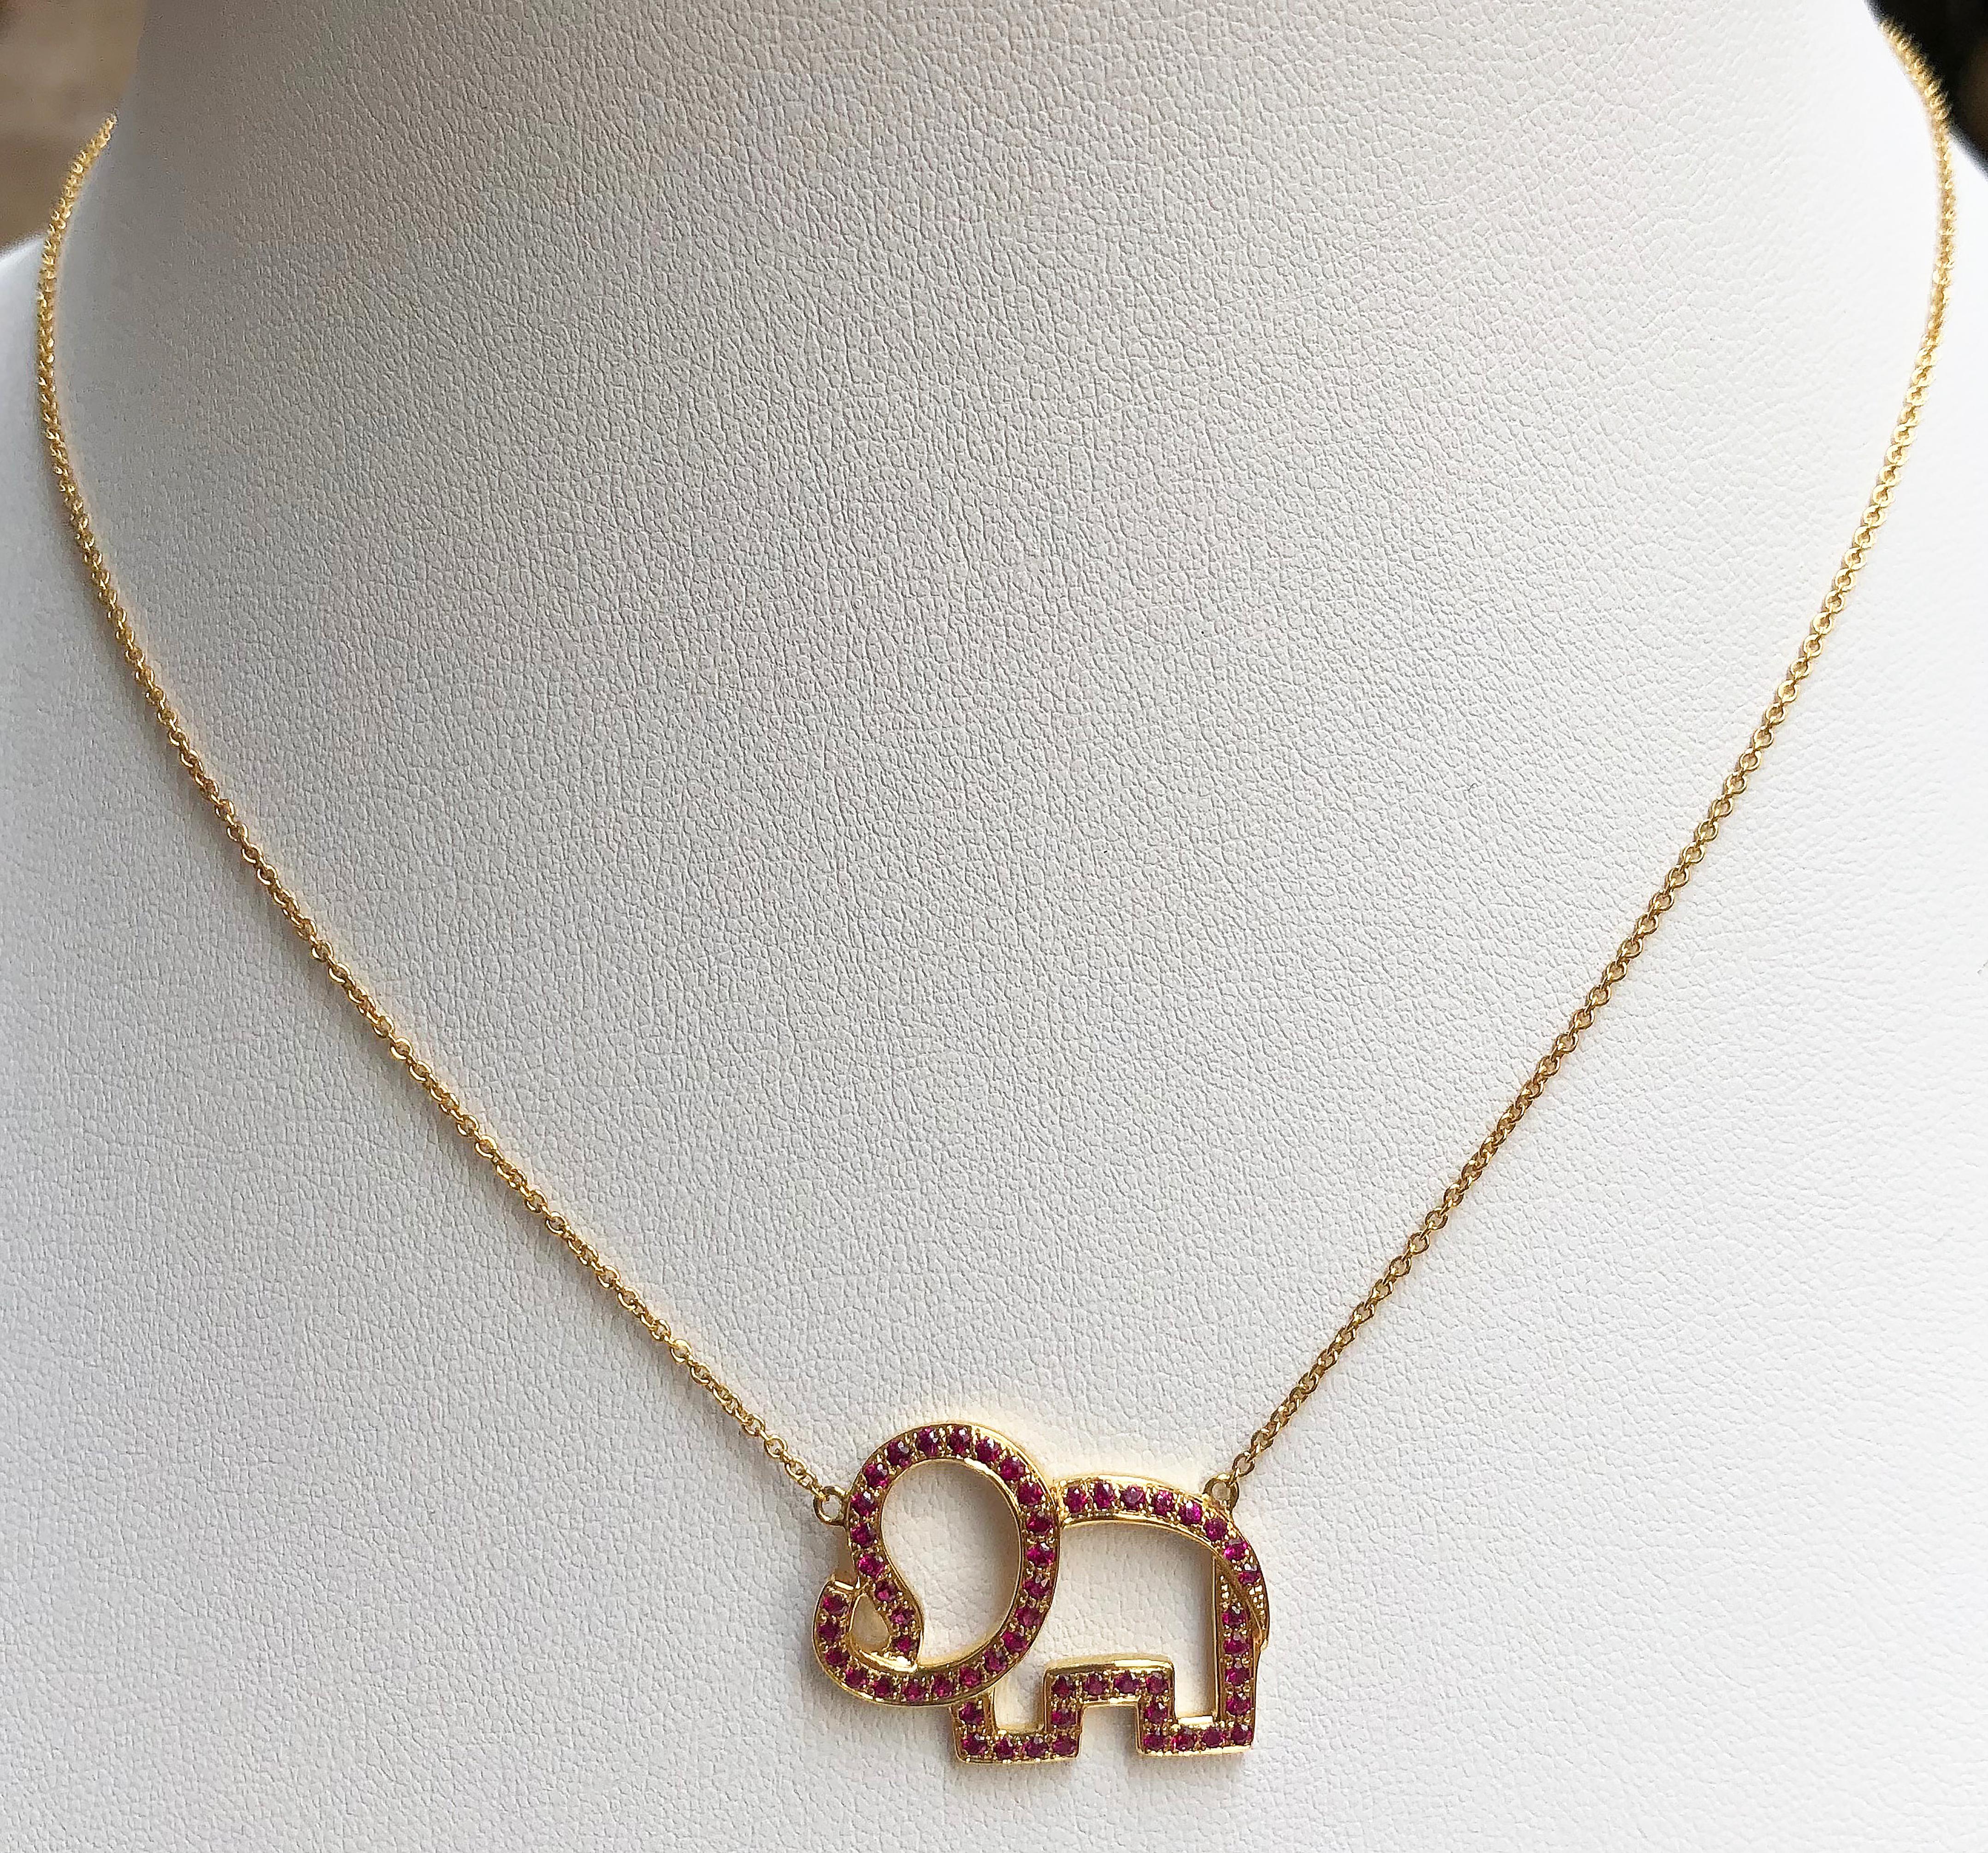 Ruby 0.71 carat Elephant Necklace set in 18 Karat Gold Settings

Width:  2.5 cm 
Length: 42.5 cm
Total Weight: 4.98 grams

